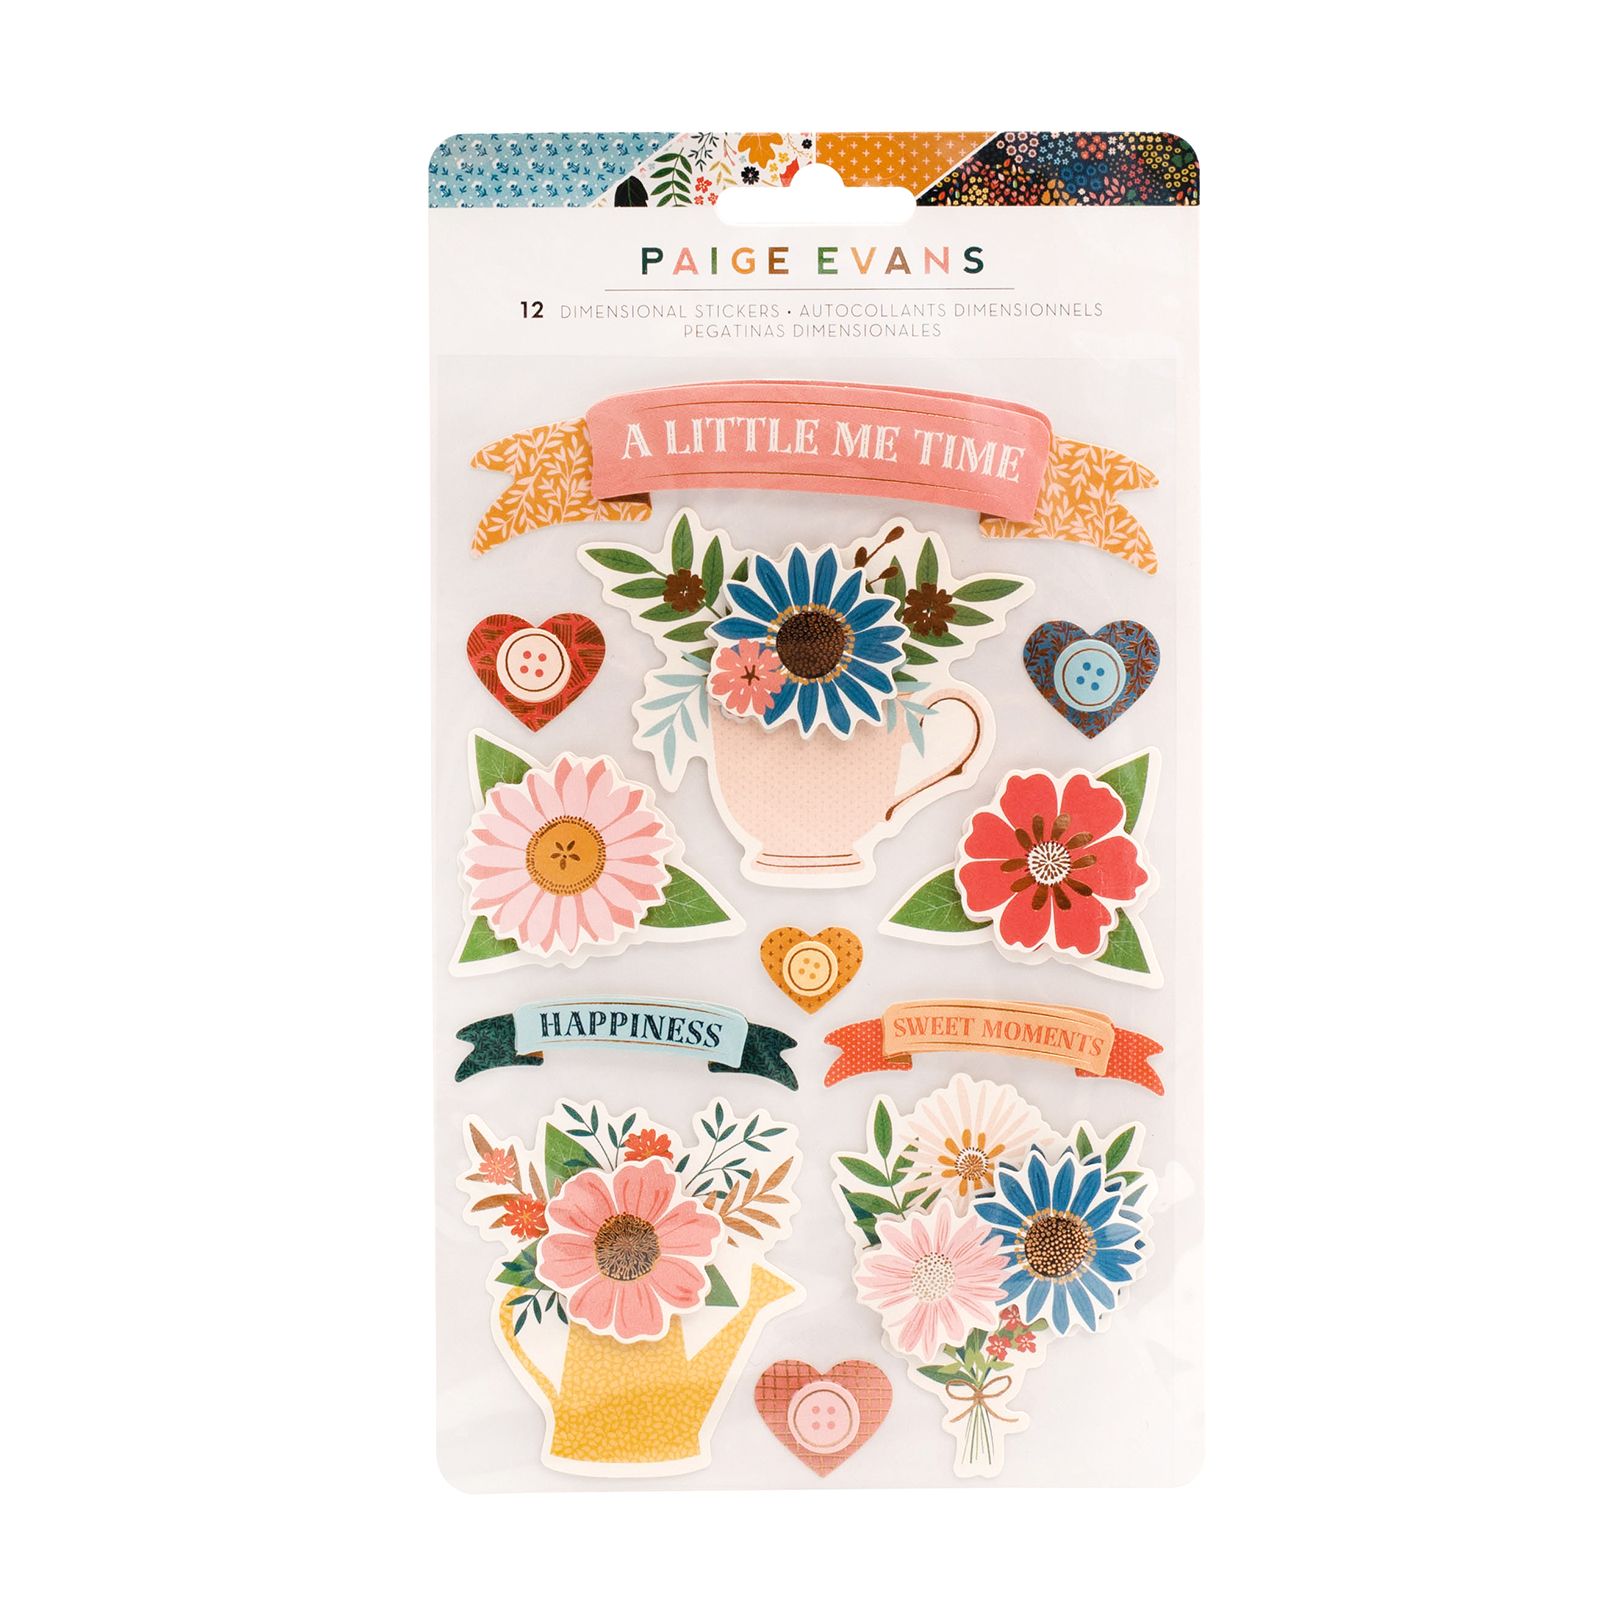 New Paige Evans Collection Bungalow Lane Set Embellishments by American Craft,Crafts Supplies,Sticker,Chipboard 12x12,Sticker Book Foil Fall